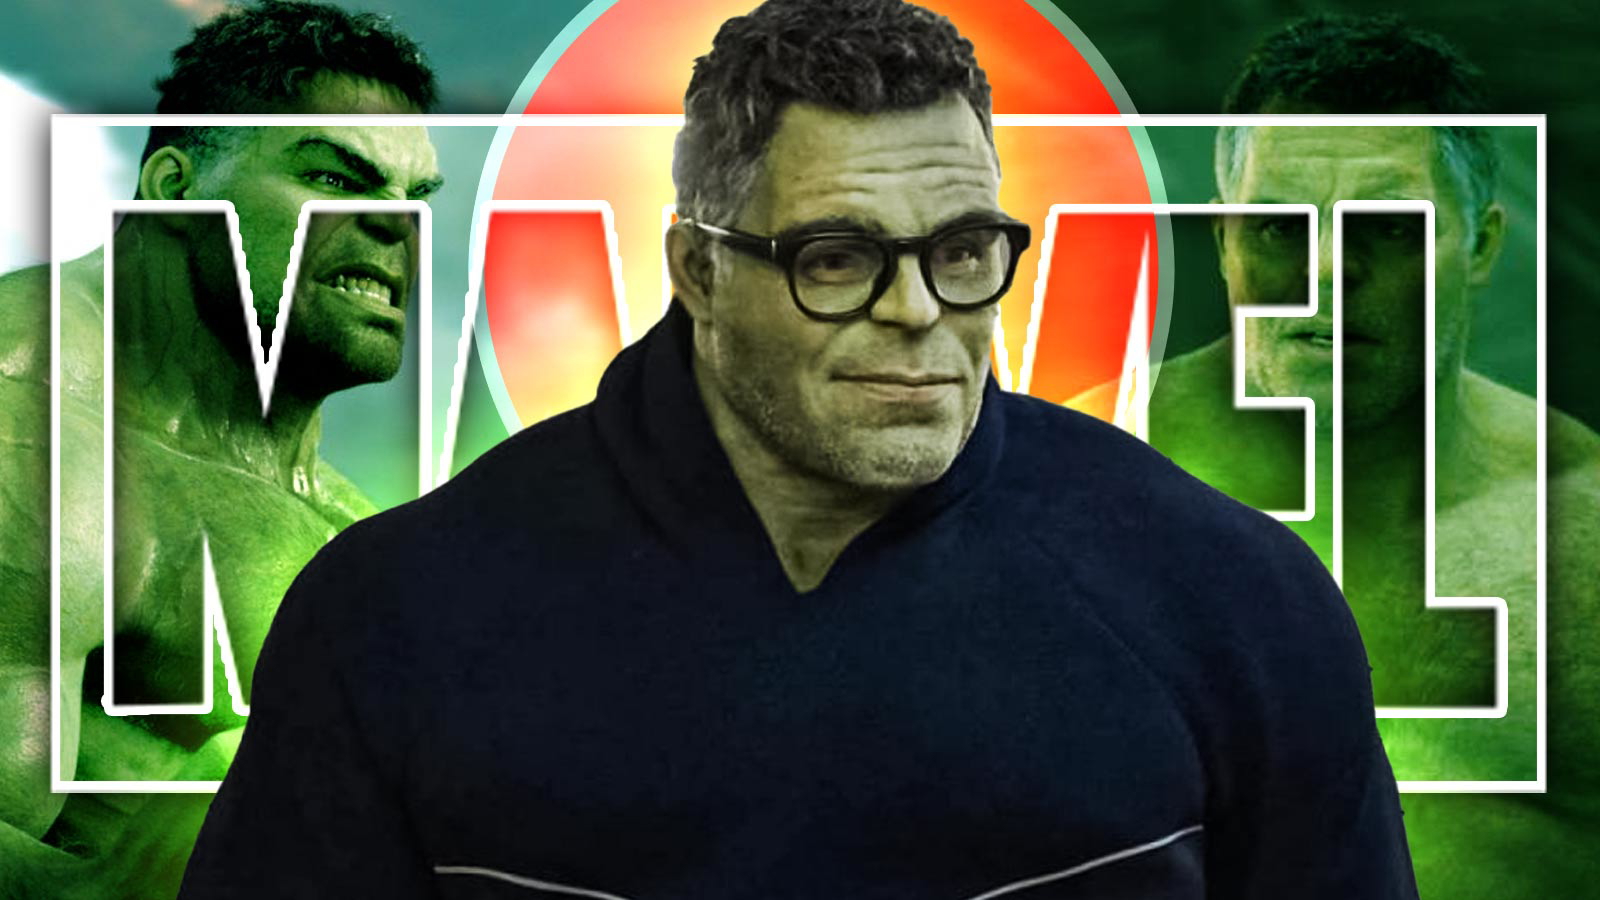 “Very milquetoast… being played for comedic effect”: Marvel’s Incompetent Arc for the Hulk is Beginning to Anger Fans Despite MCU’s Promising Future